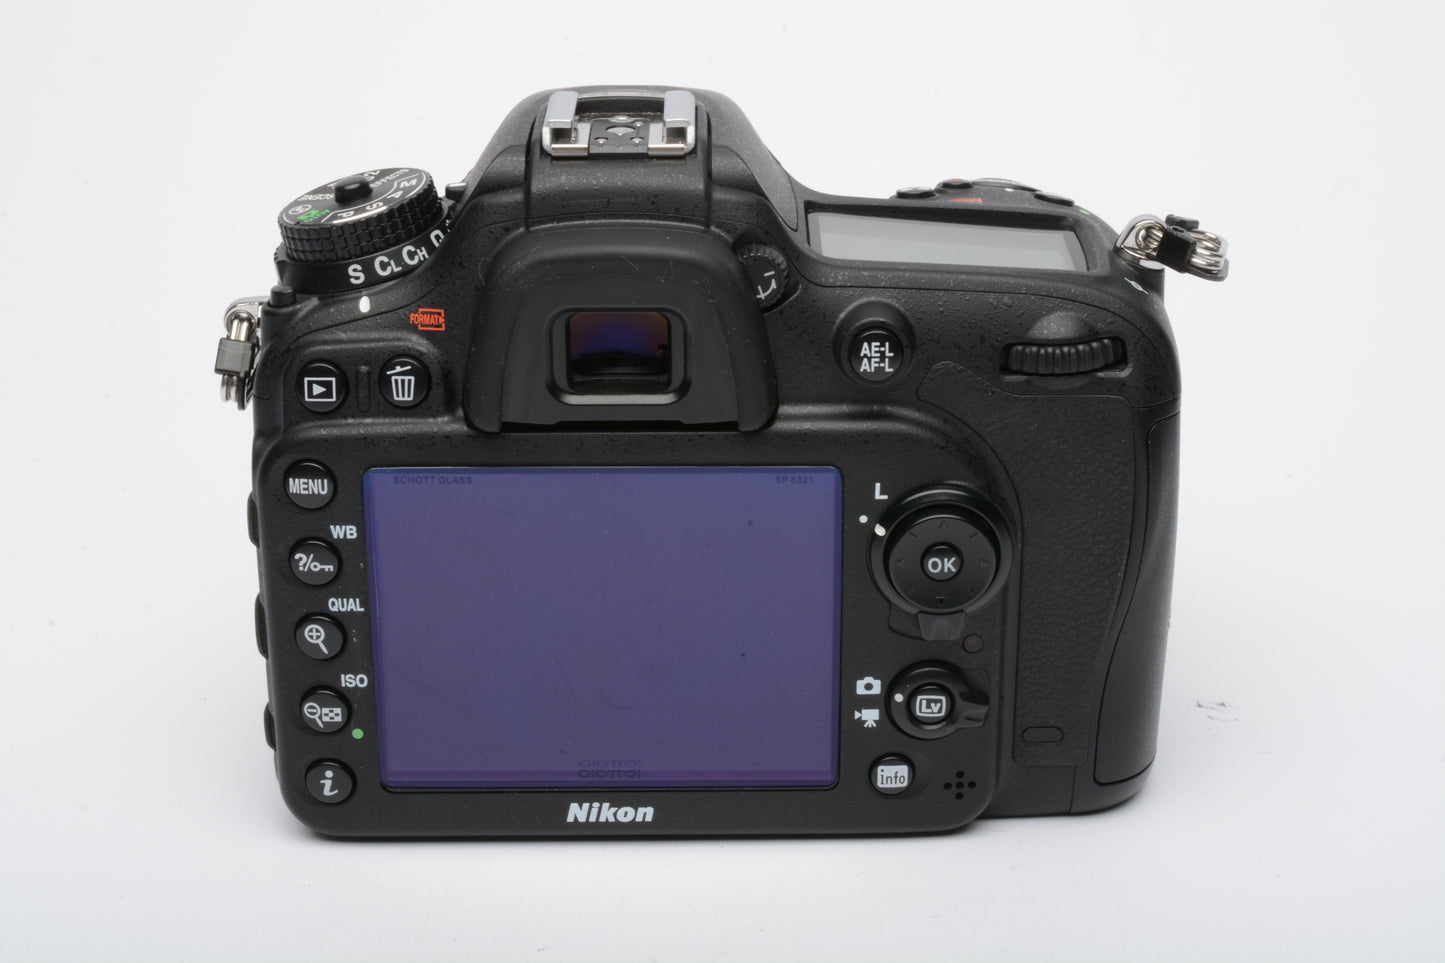 Nikon D7100 DSLR Body Only Batt, charger, Only 7669 Acts!  Fully tested, nice!